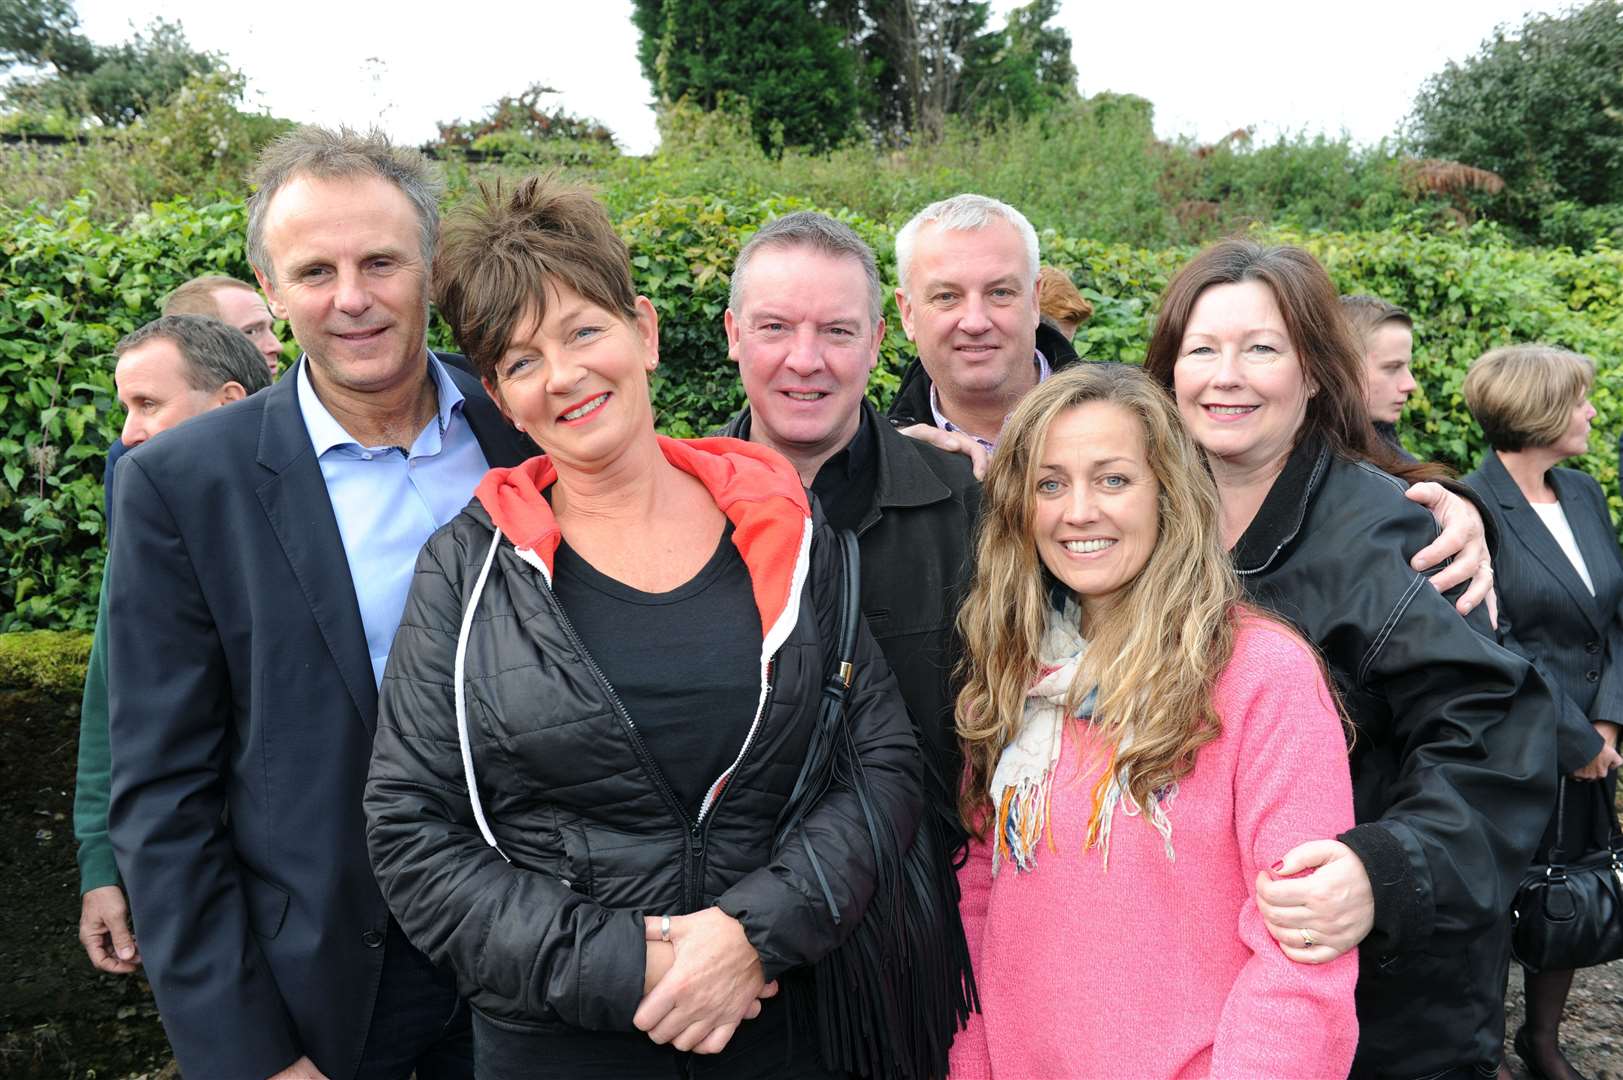 Trustees of the Friends of Shelby Newstead charity, which was part of a DIY SOS project near Longfield